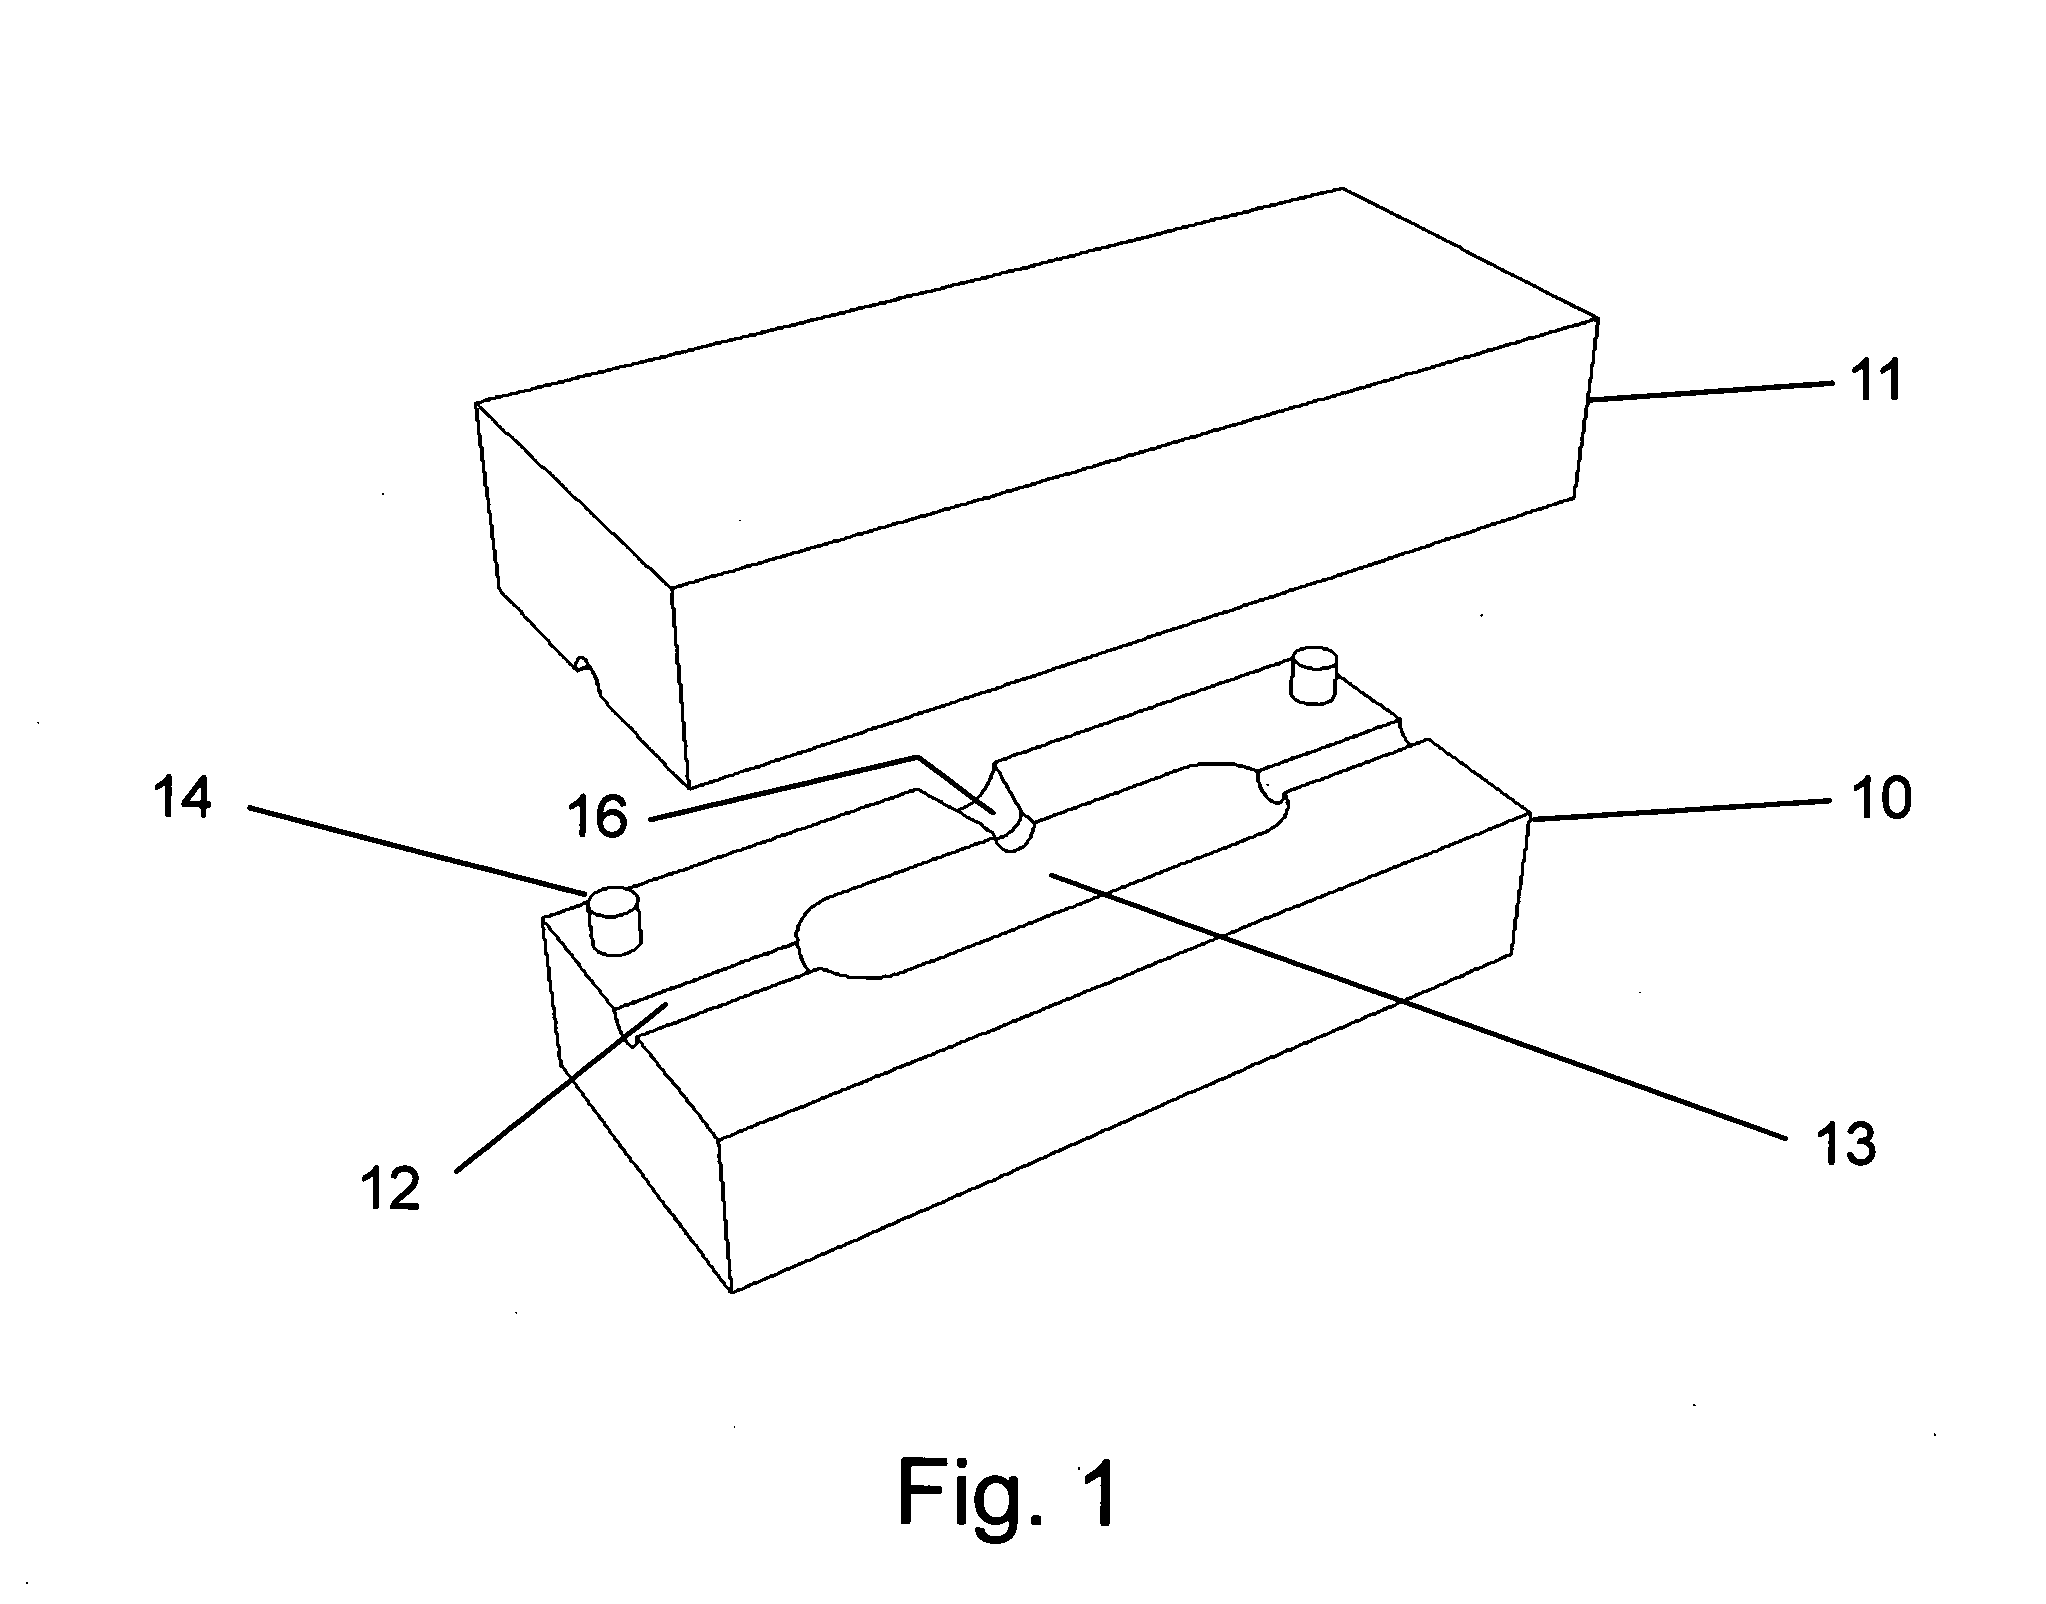 Method and apparatus for encapsulating wire, hose, and tube splices, connections, and repairs